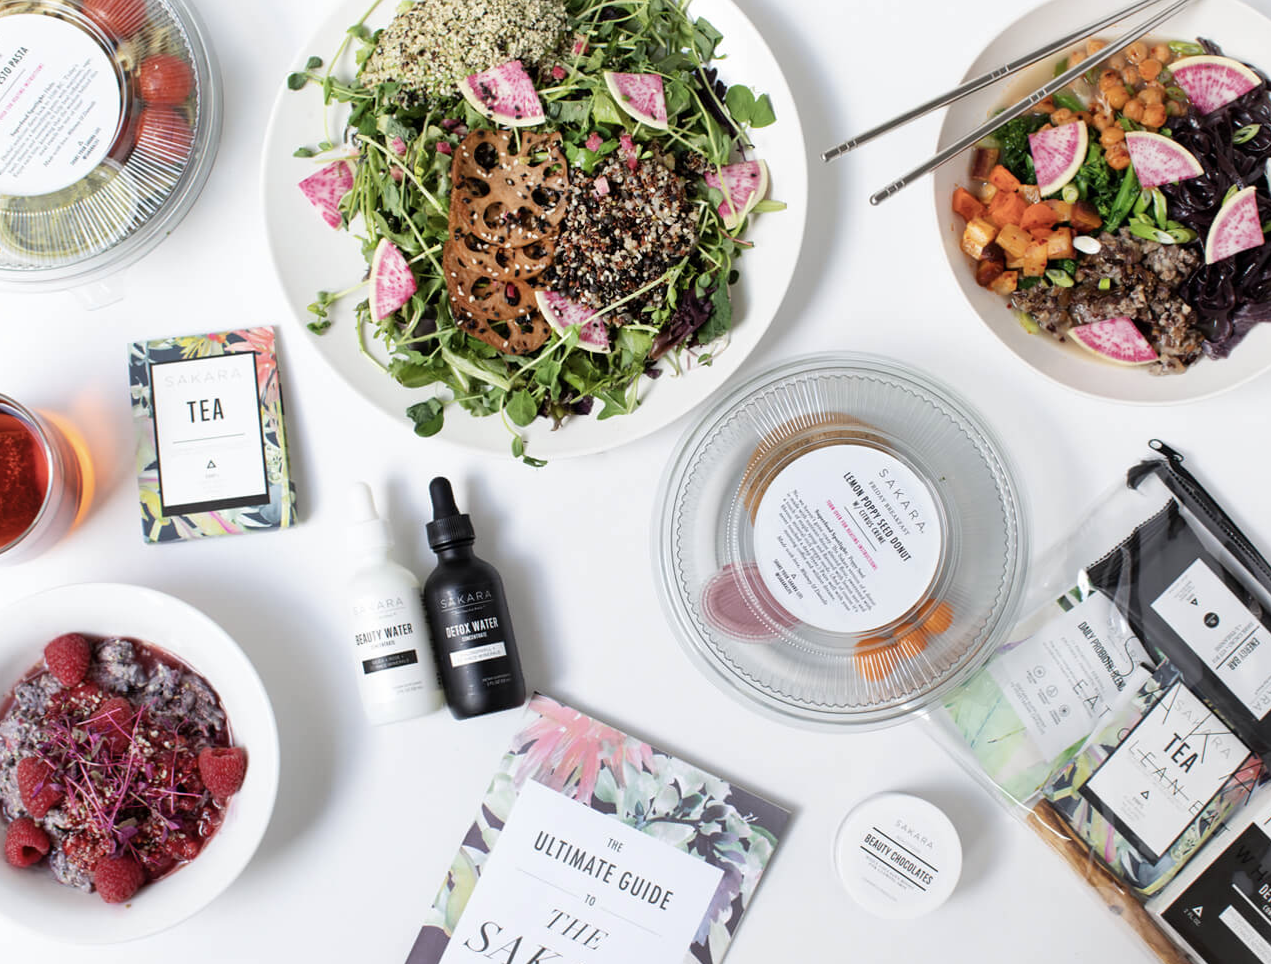 Sakara Life Signature Meal Program Review. Use code XOMINDY for %20 off your order!